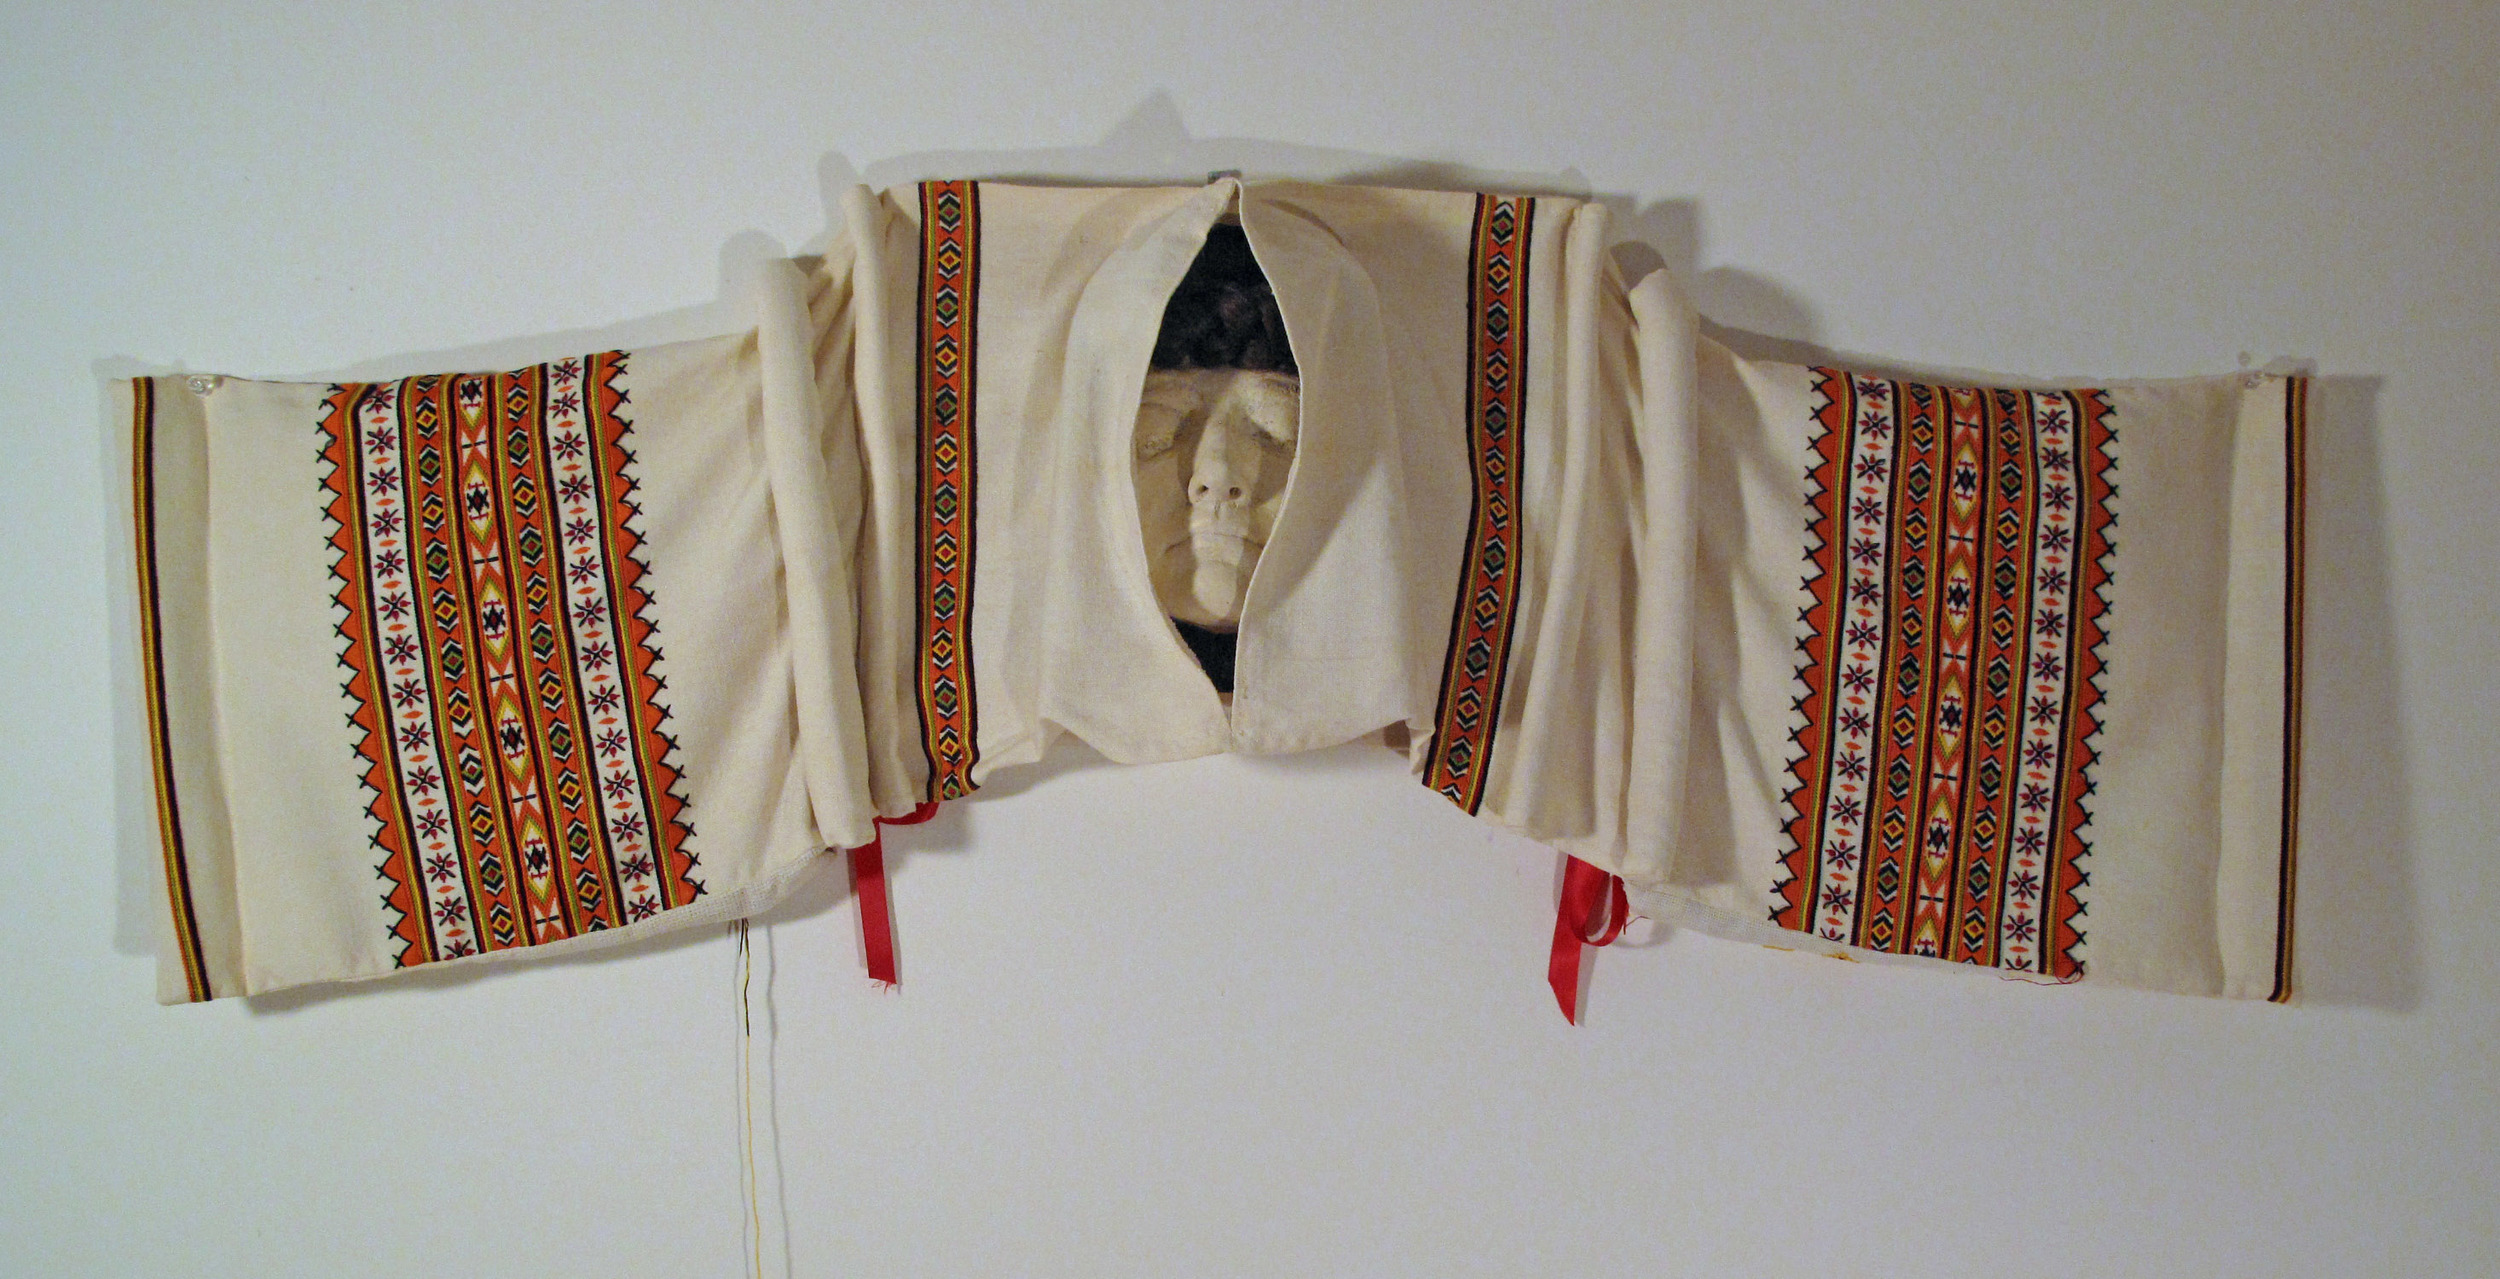 2bg(0) - The Guardian, clay, embroidery, braided hair, letters, wood - open -  22x42x6 in. 1993-1998.jpg